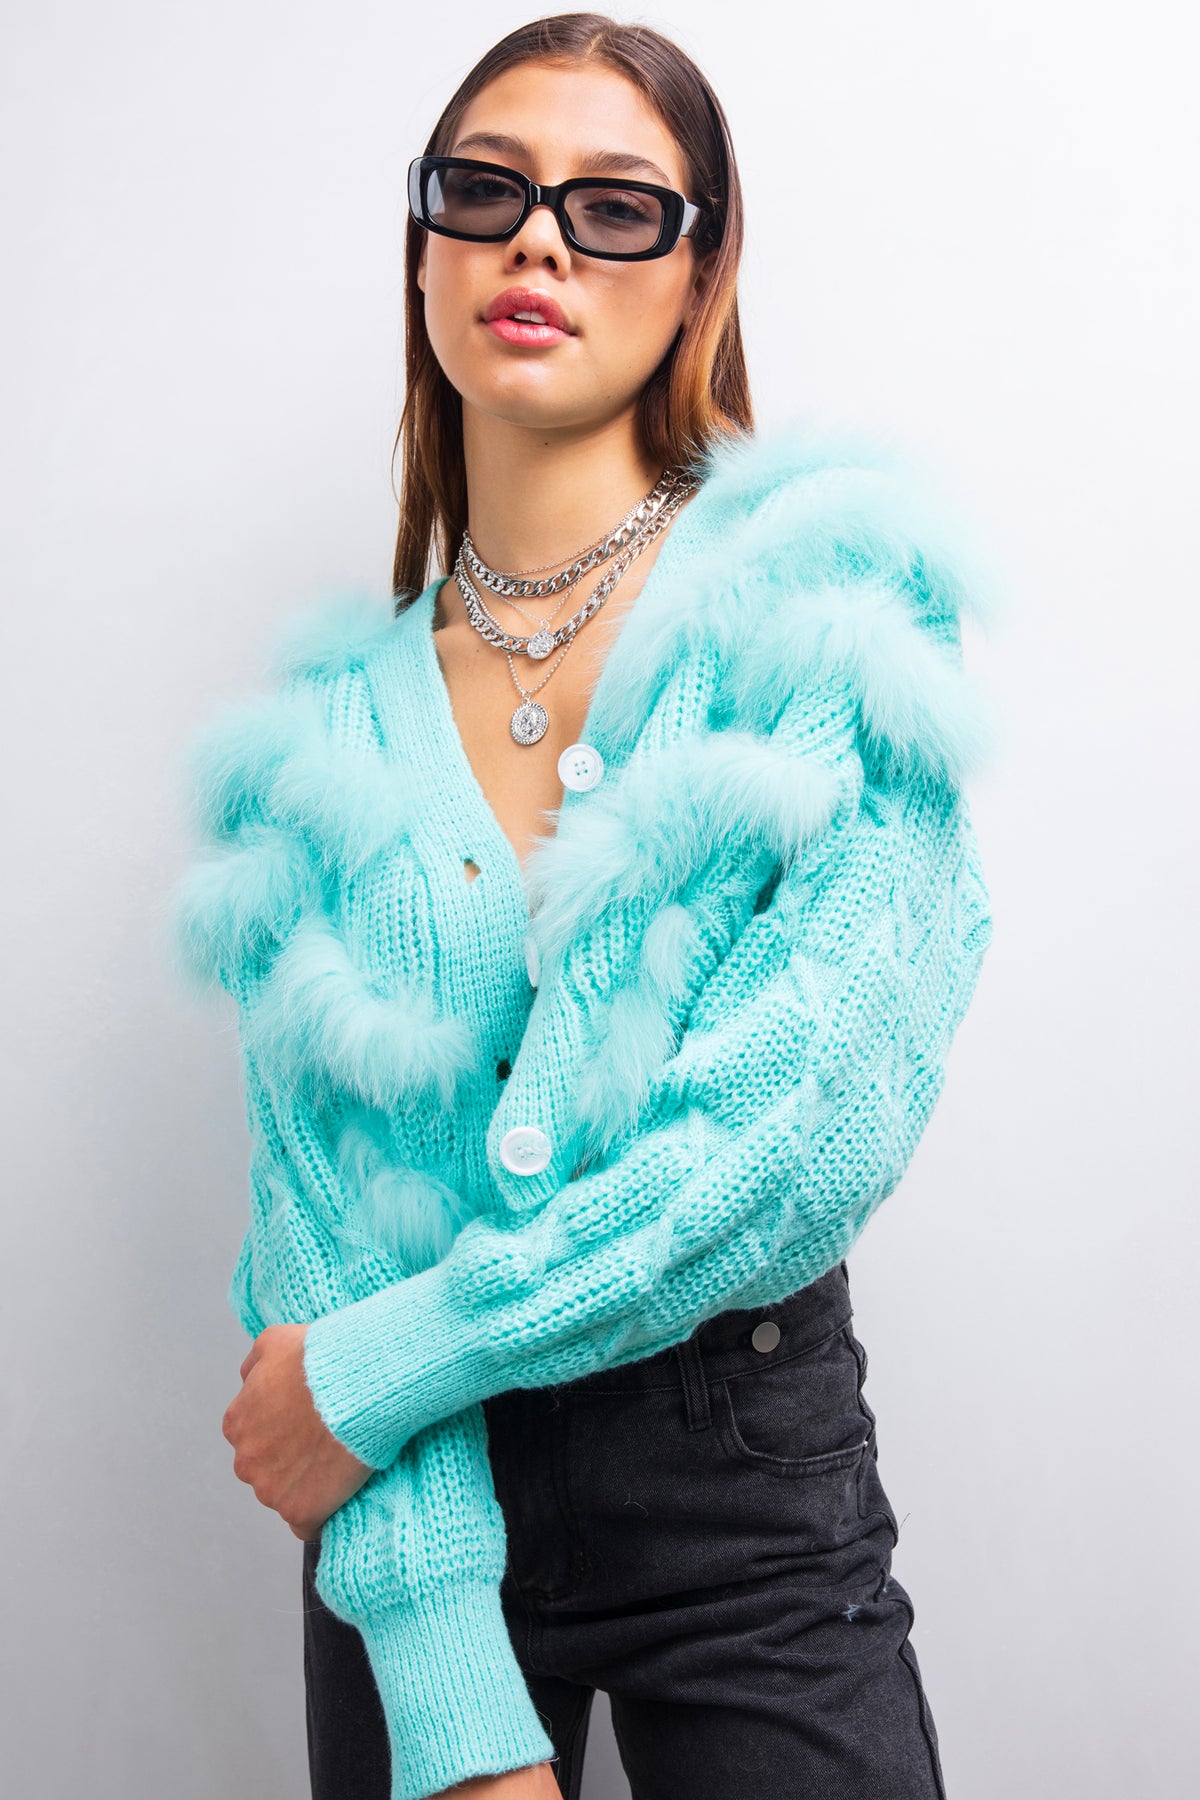 Honey Pot fur and wool cardigan in Baby Blue